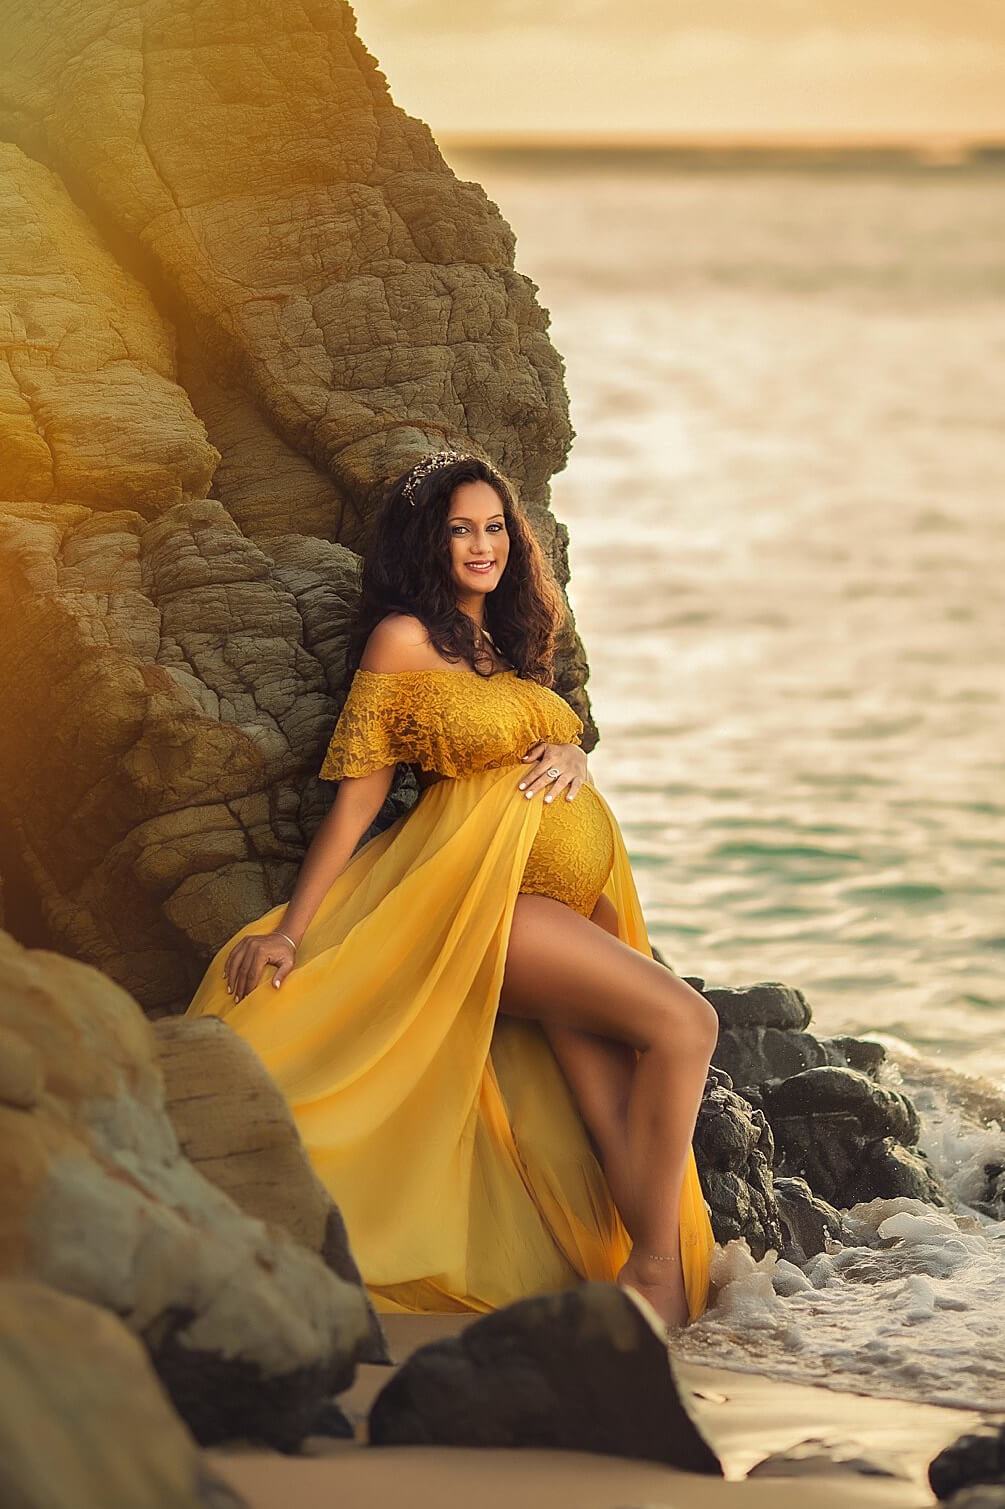 pregnant model poses by the water and smiling at the camera while wearing a long yellow dress and a crown.